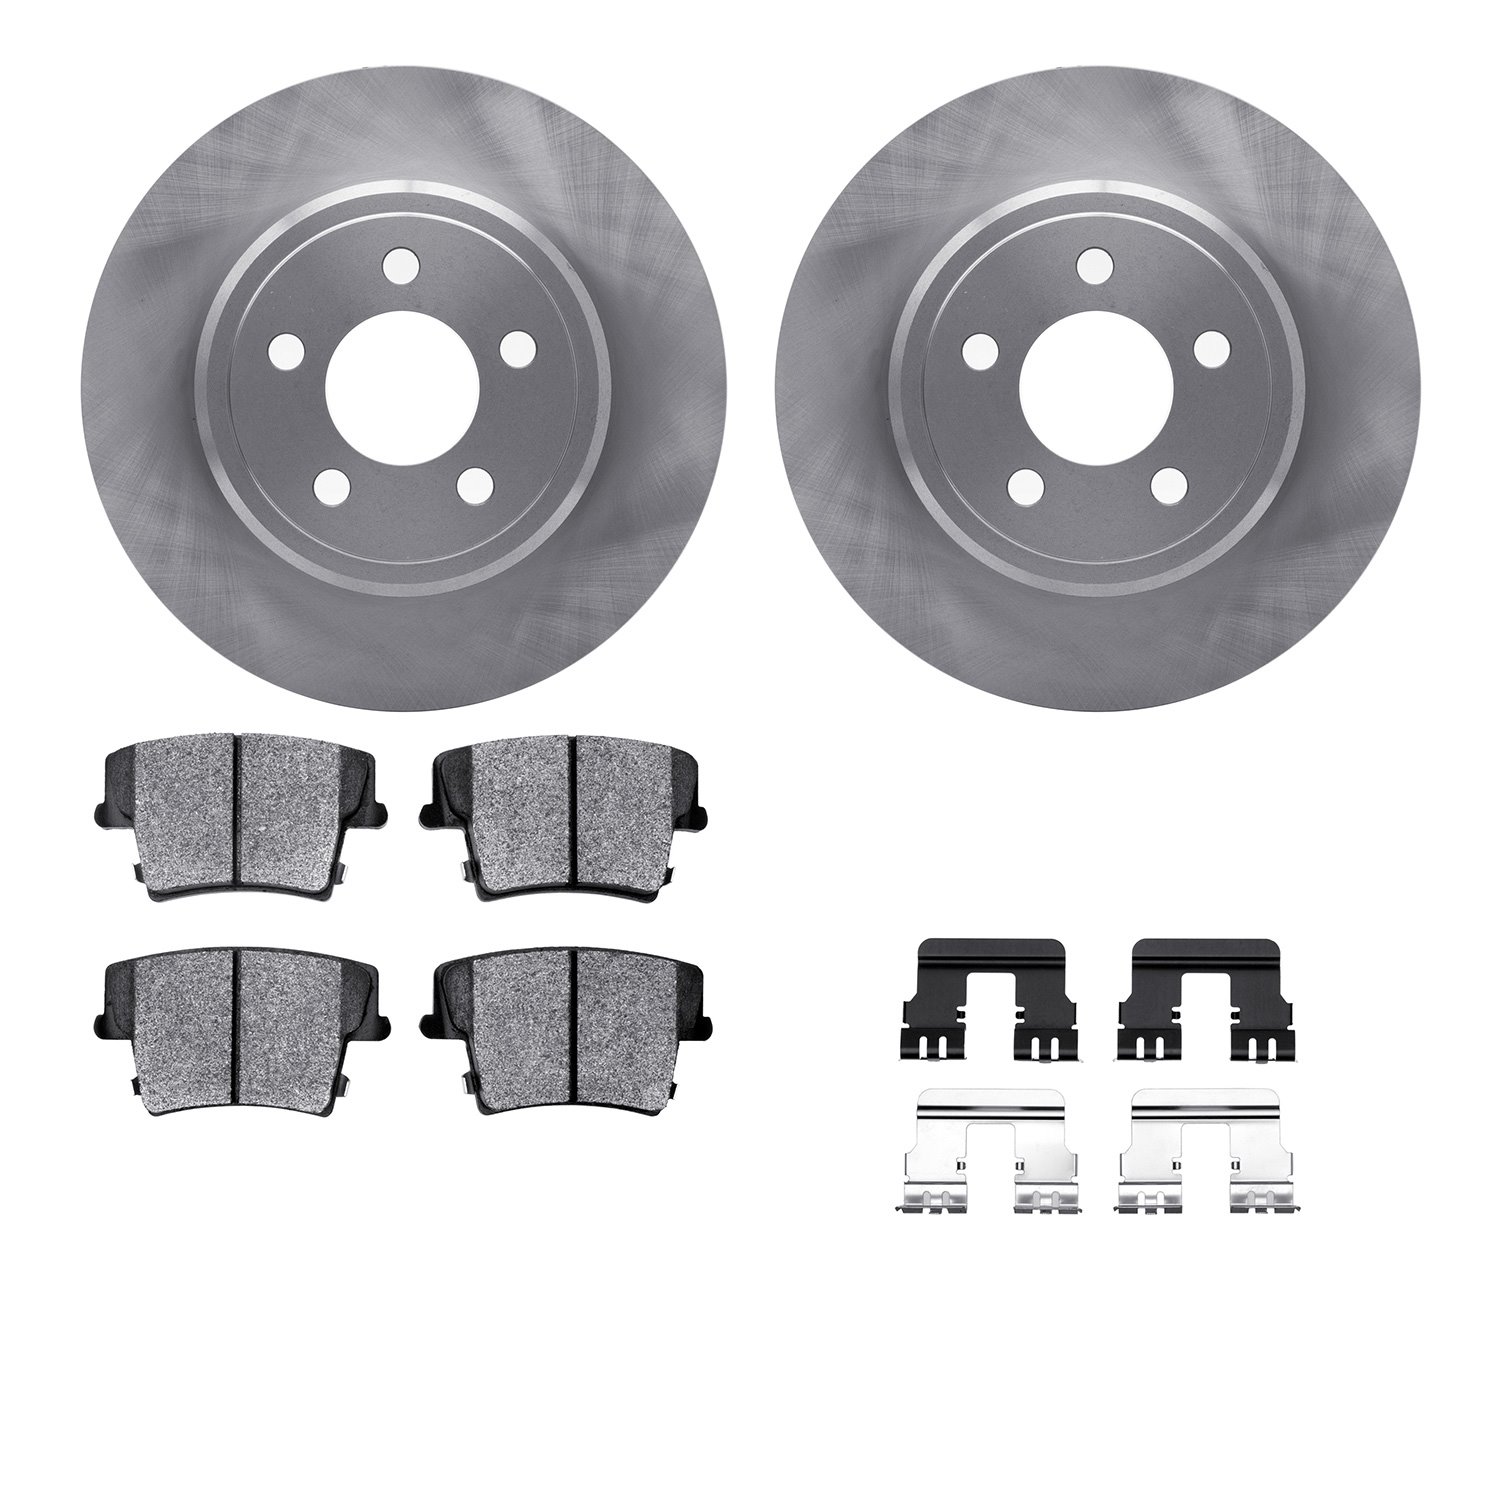 6312-39034 Brake Rotors with 3000-Series Ceramic Brake Pads Kit with Hardware, Fits Select Mopar, Position: Rear